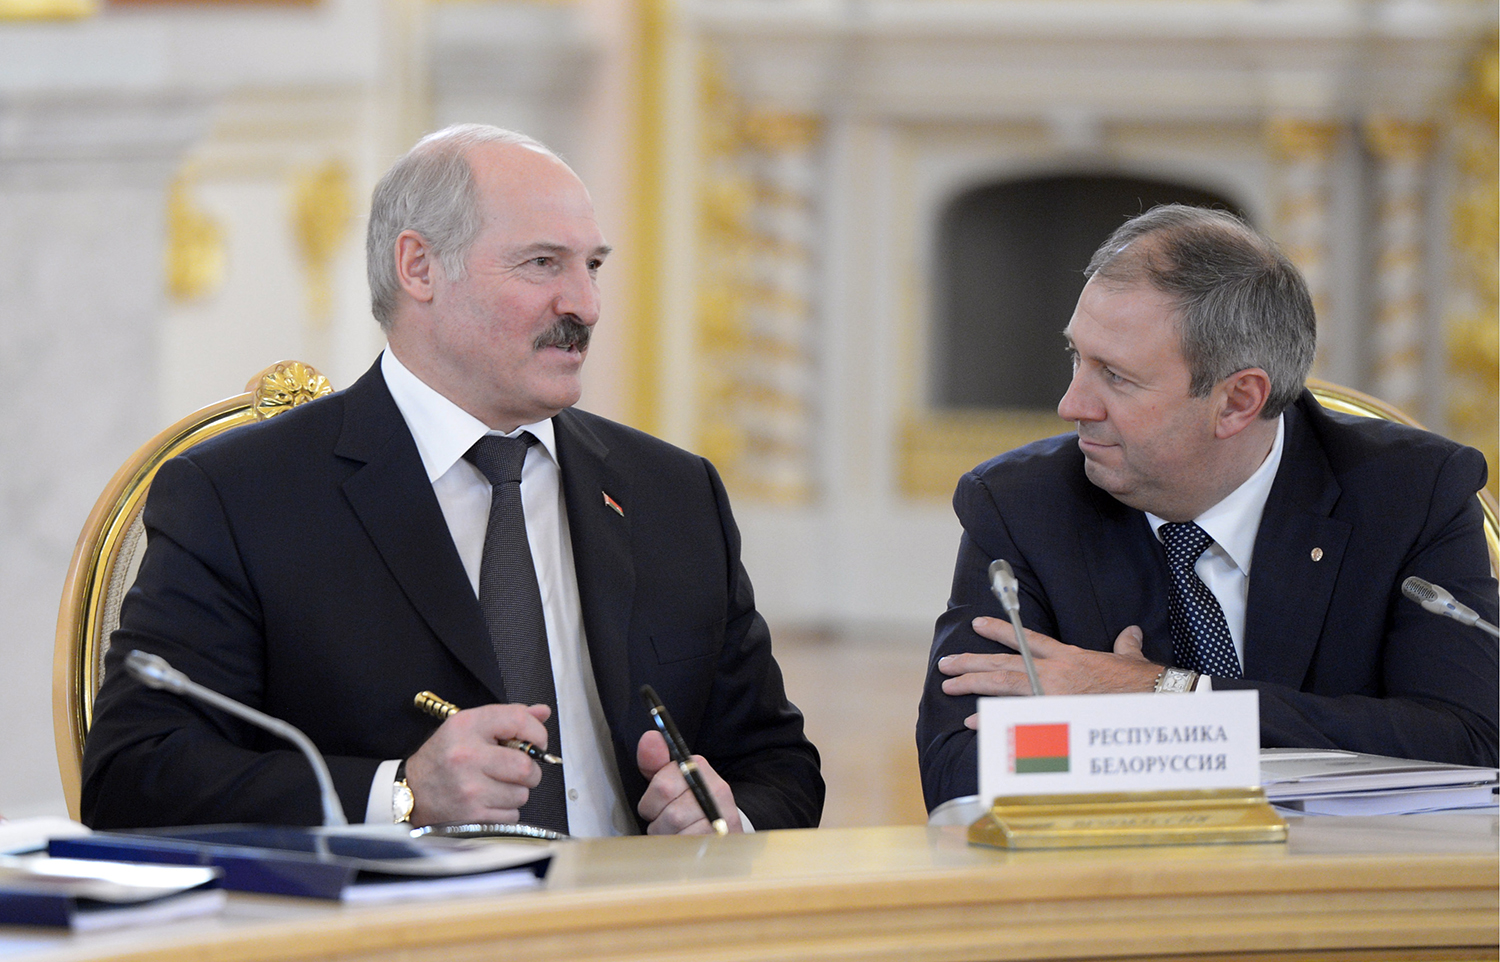 Belarus’ negotiating tactics with Russia may leave her without trade benefits